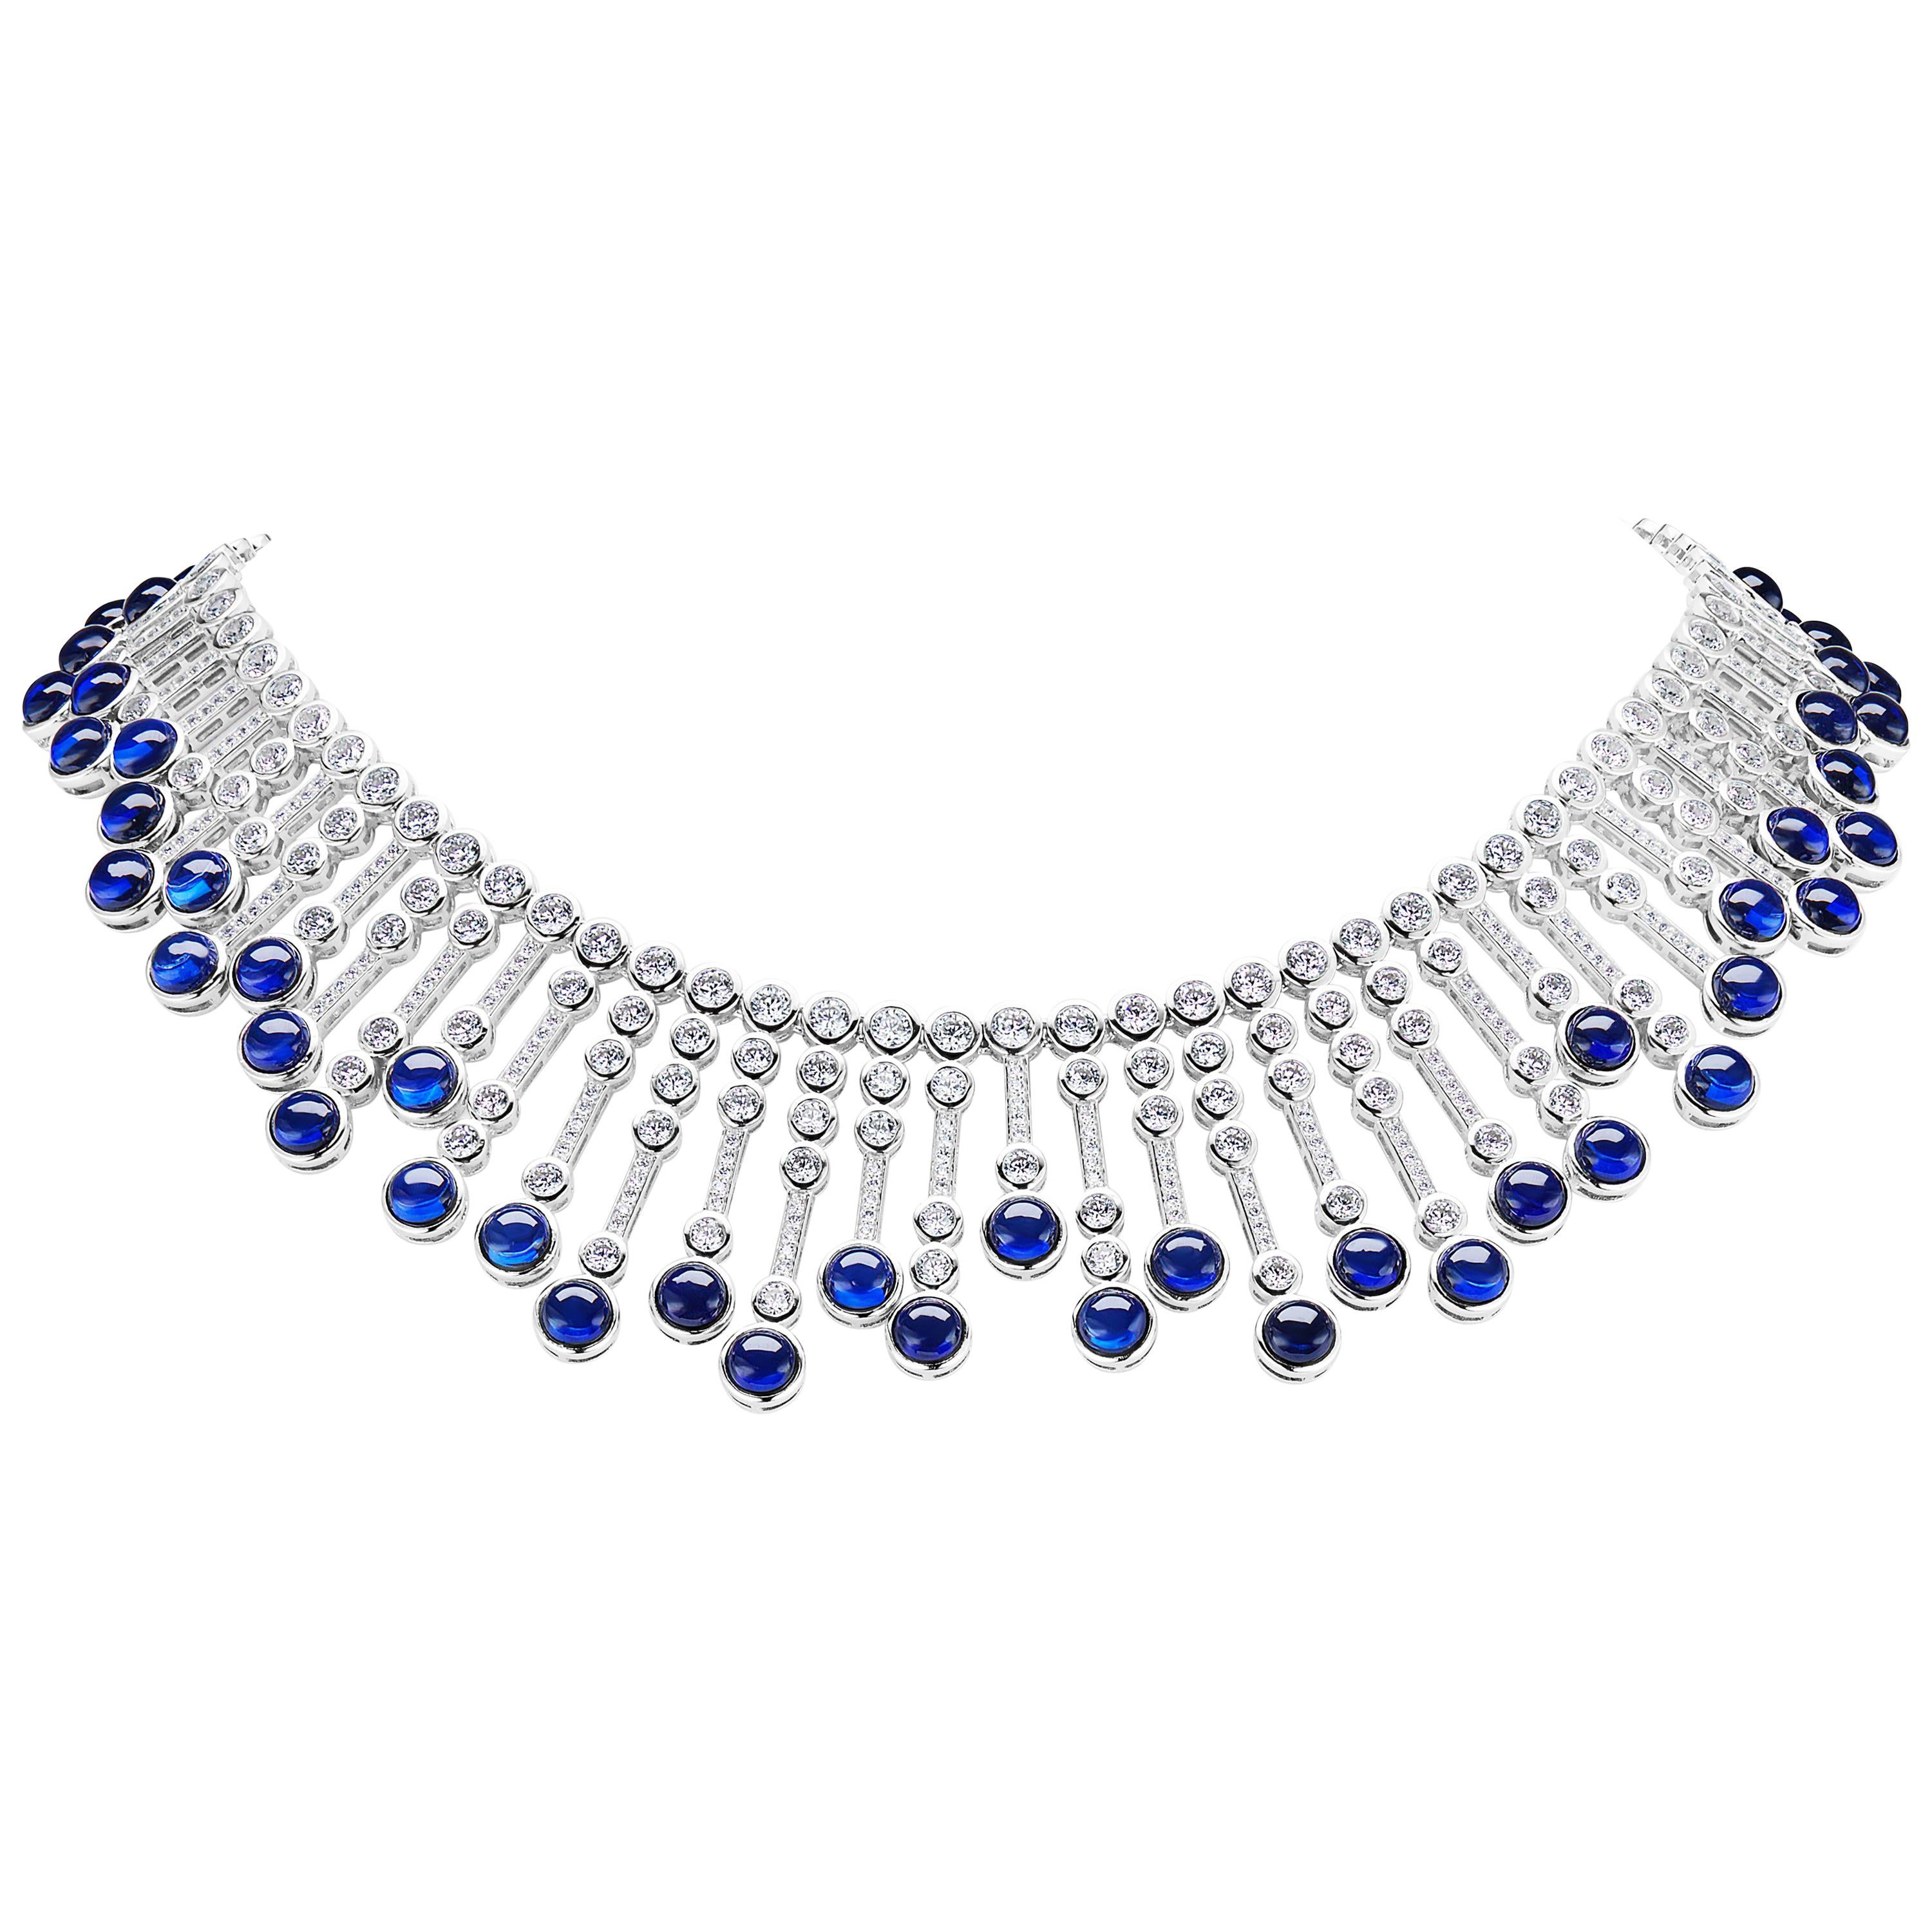 Magnificent Costume Jewelry Man-Made Cabochon Sapphire Diamond Fringe Flexible Sterling Silver Necklace of Alternating Gem Tipped Cubic Zirconia Set Bars Suspended from a Double Row Bezel CZ Set Sterling Silver Flexible Necklace measures 16 Inches.